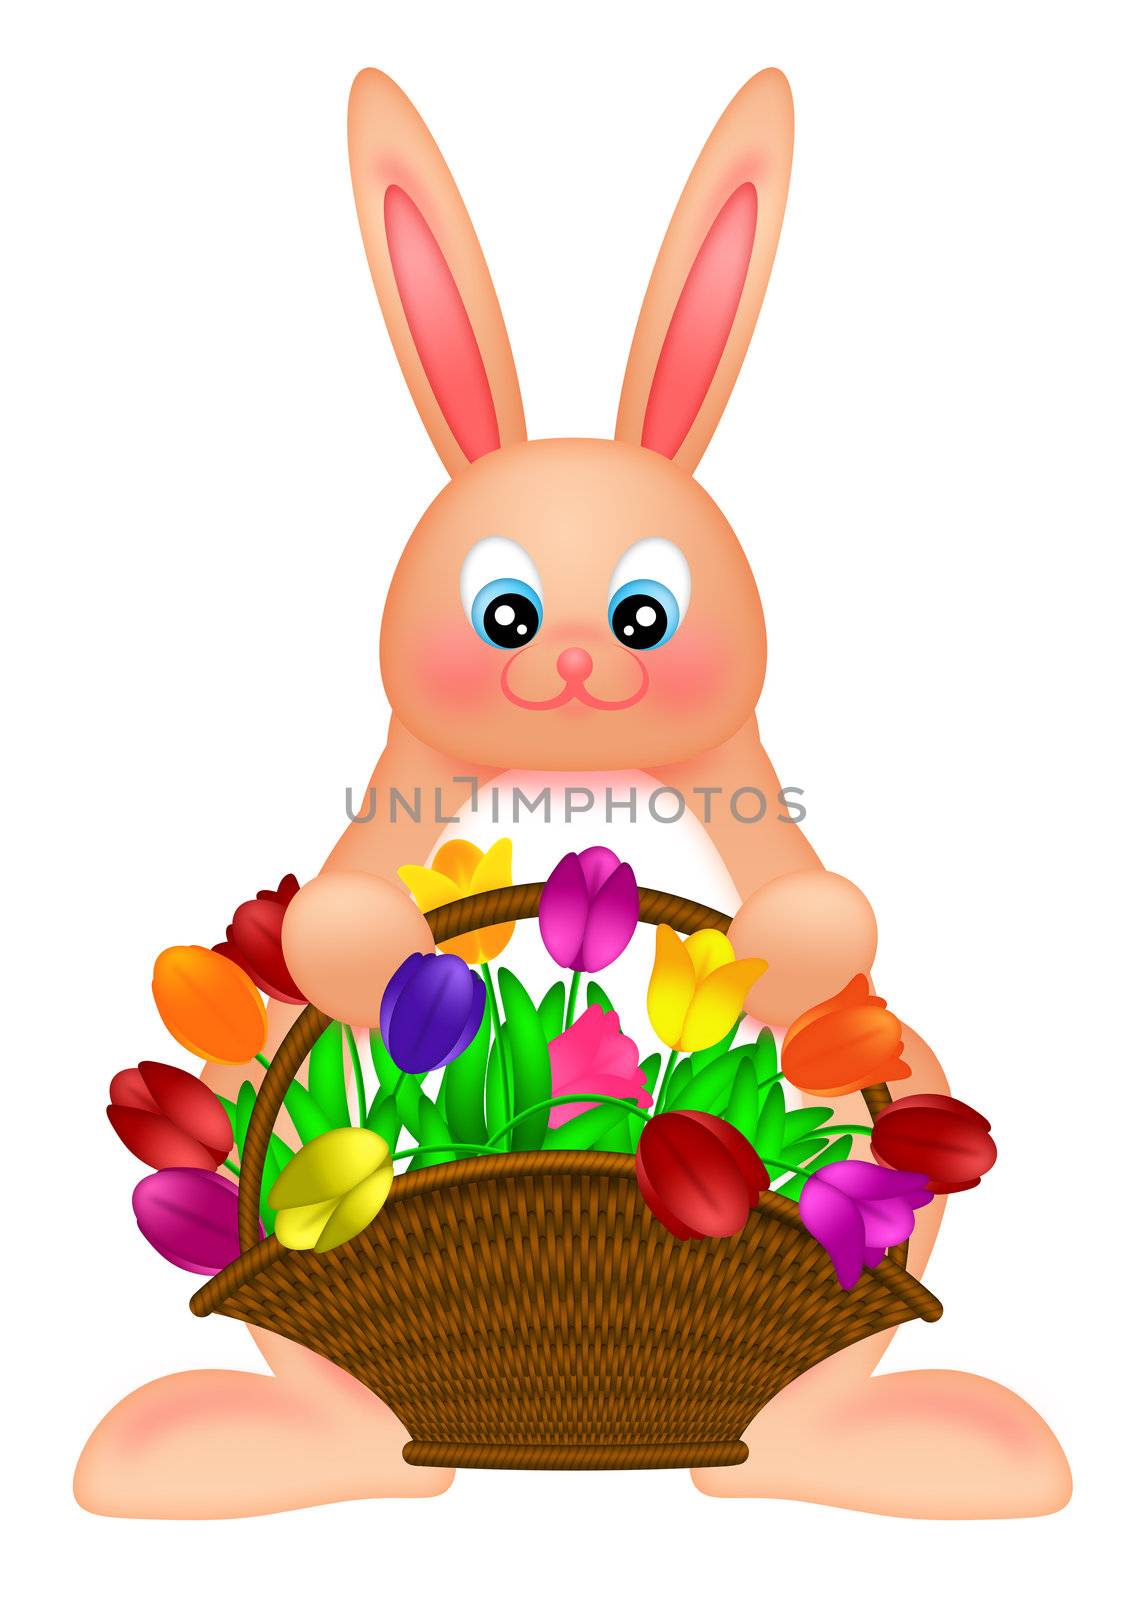 Happy Easter Bunny Rabbit  with Colorful Tulips Basket Illustrat by jpldesigns